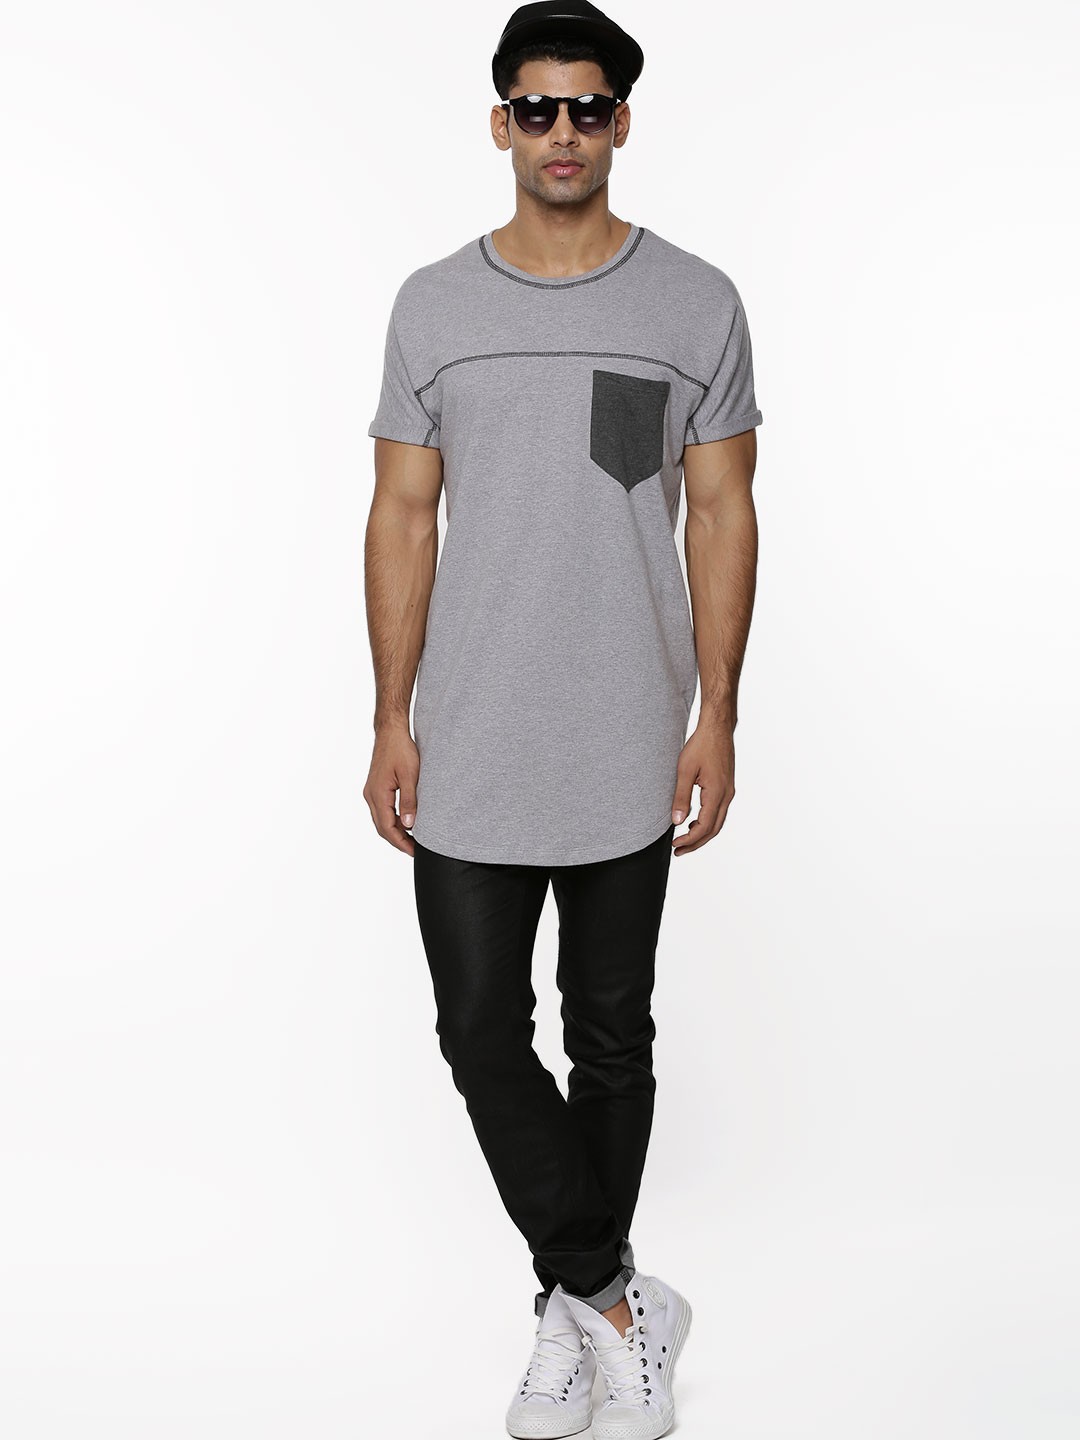 Over-sized tee for men